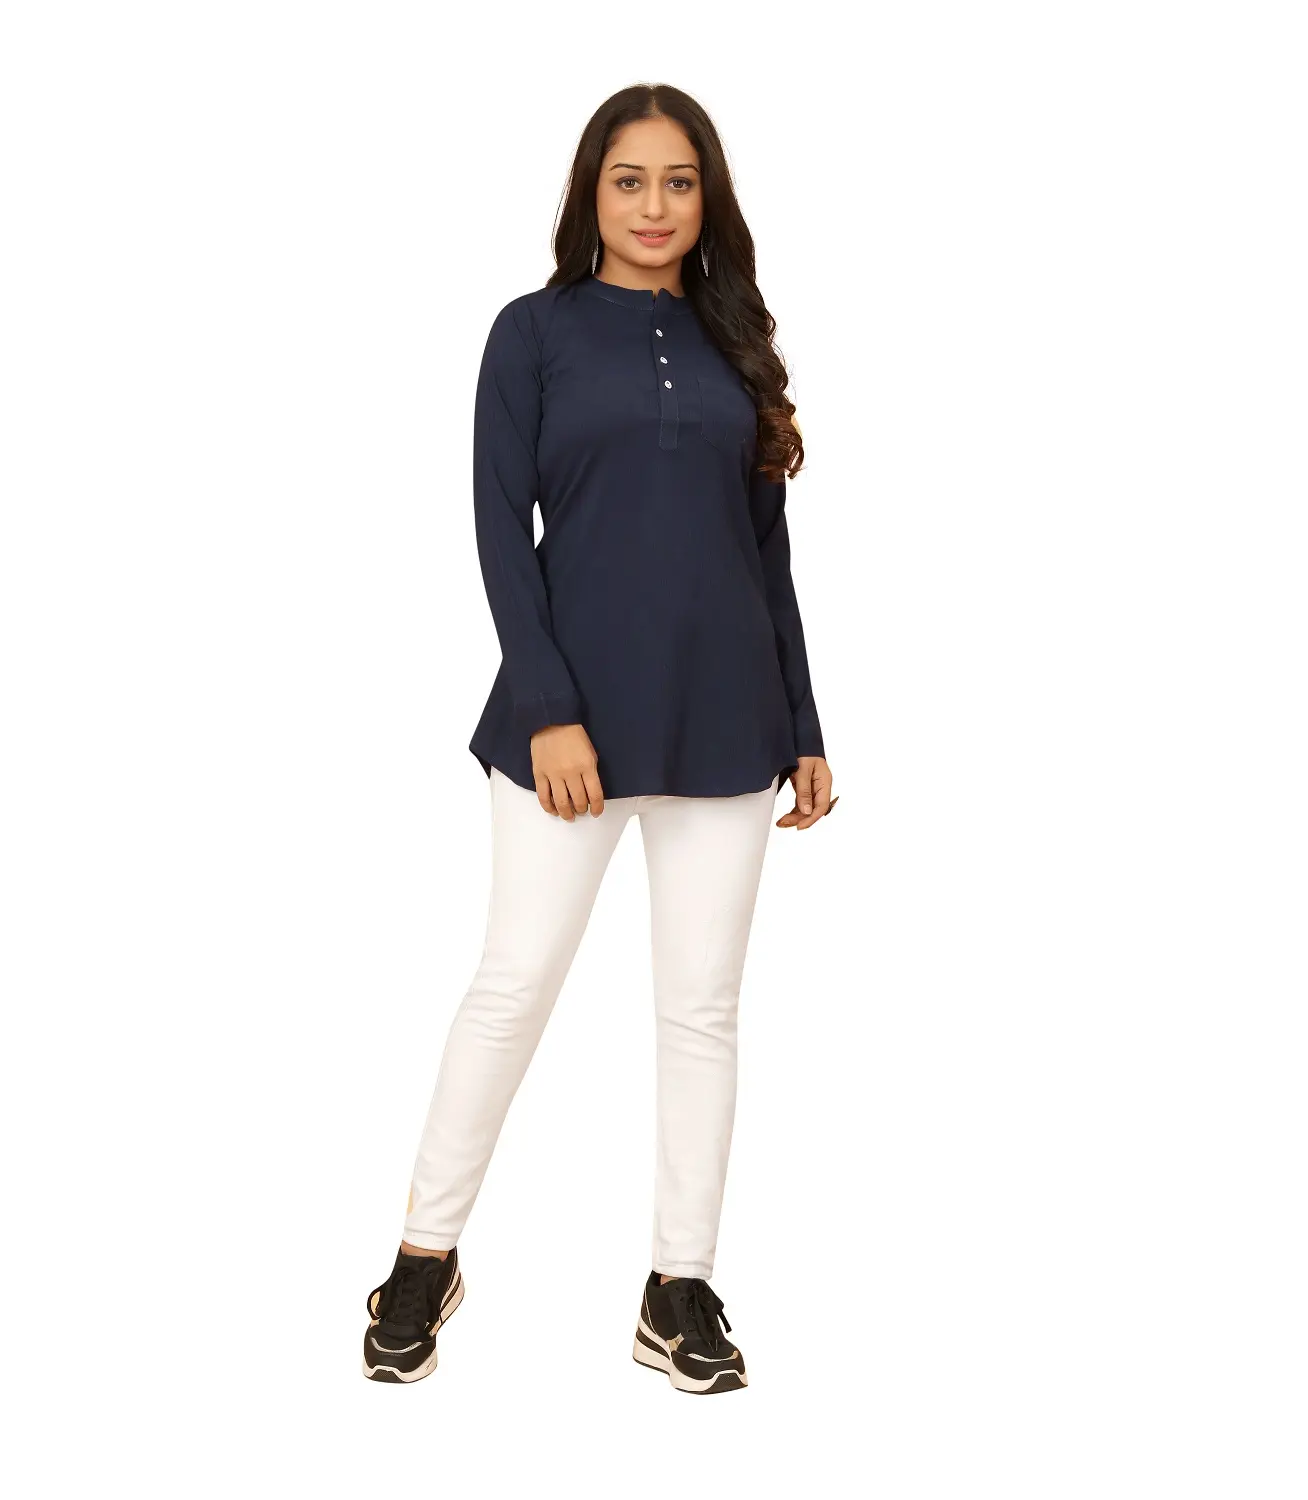 Indian Ethnic Ready to Wear Fancy Top Kesudi Women Solid Tunic Tops Fully Stitched 3/4 Sleeve Regular Fit for Casual Office Wear